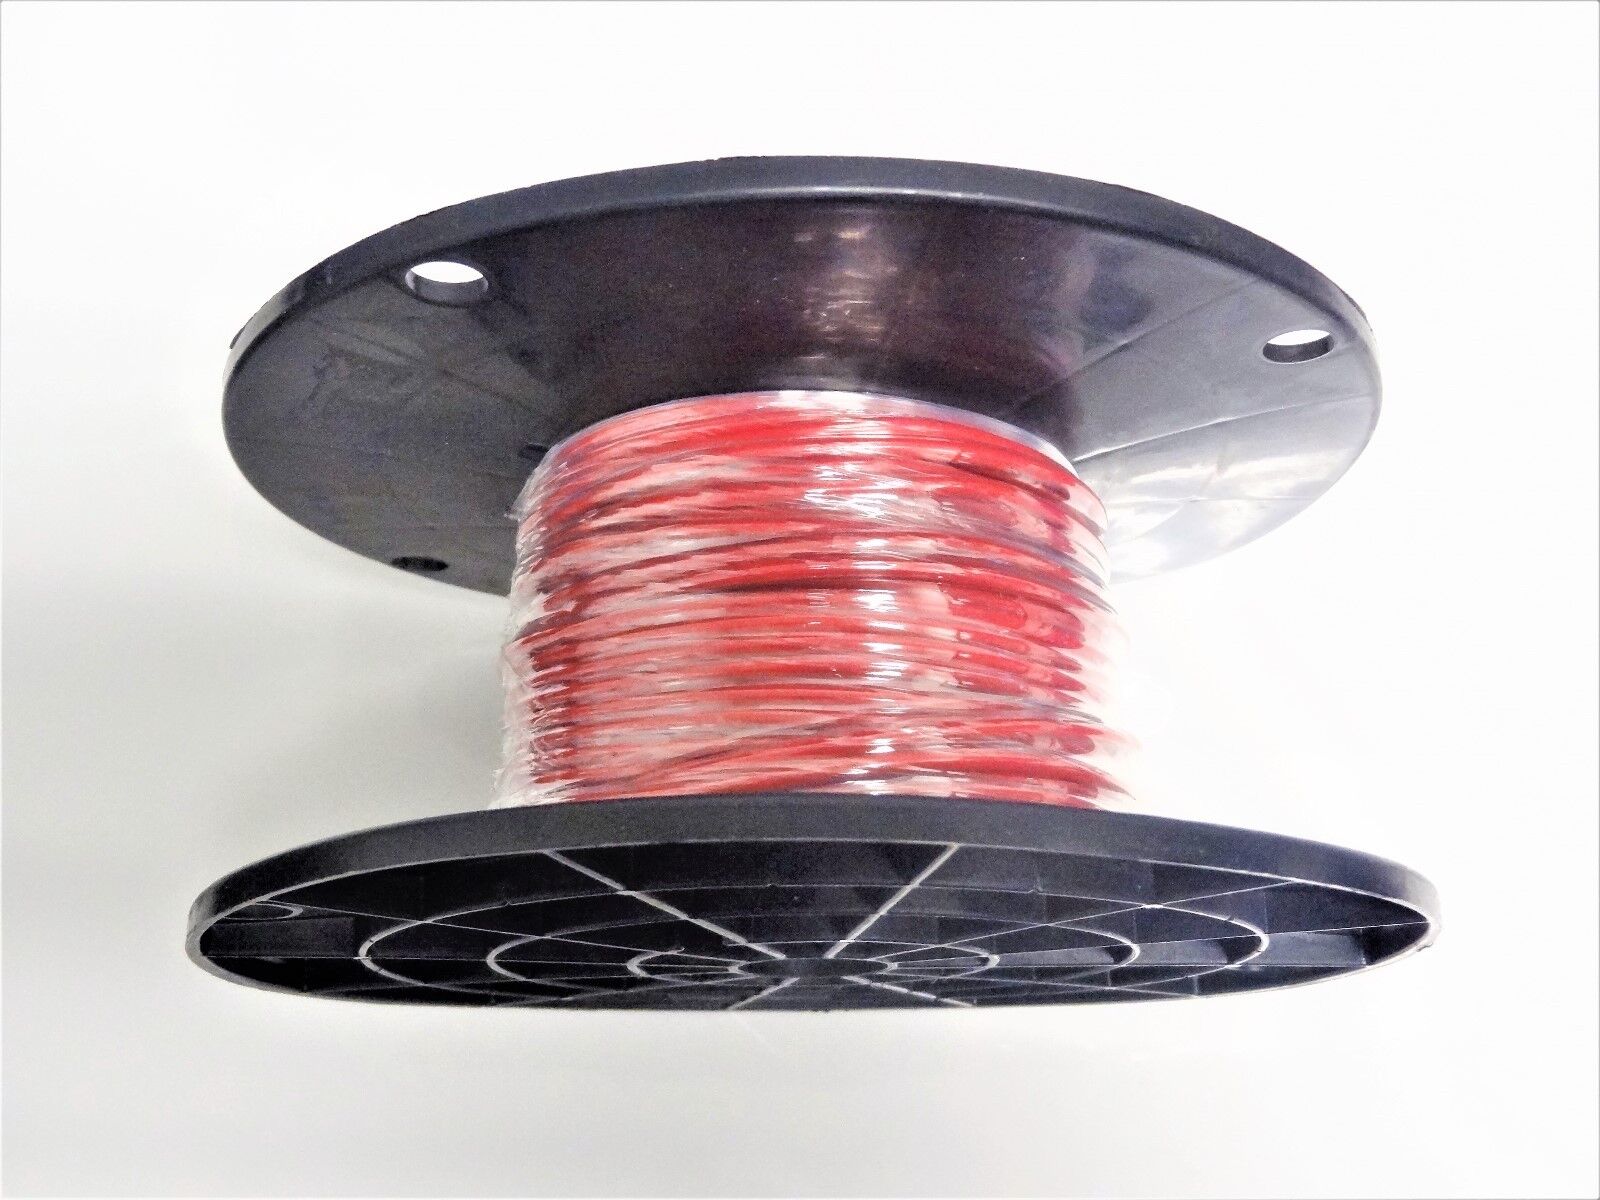 16 GAUGE TFFN TEWN WIRE RED 250' FEET 600V COPPER STRANDED GROUN